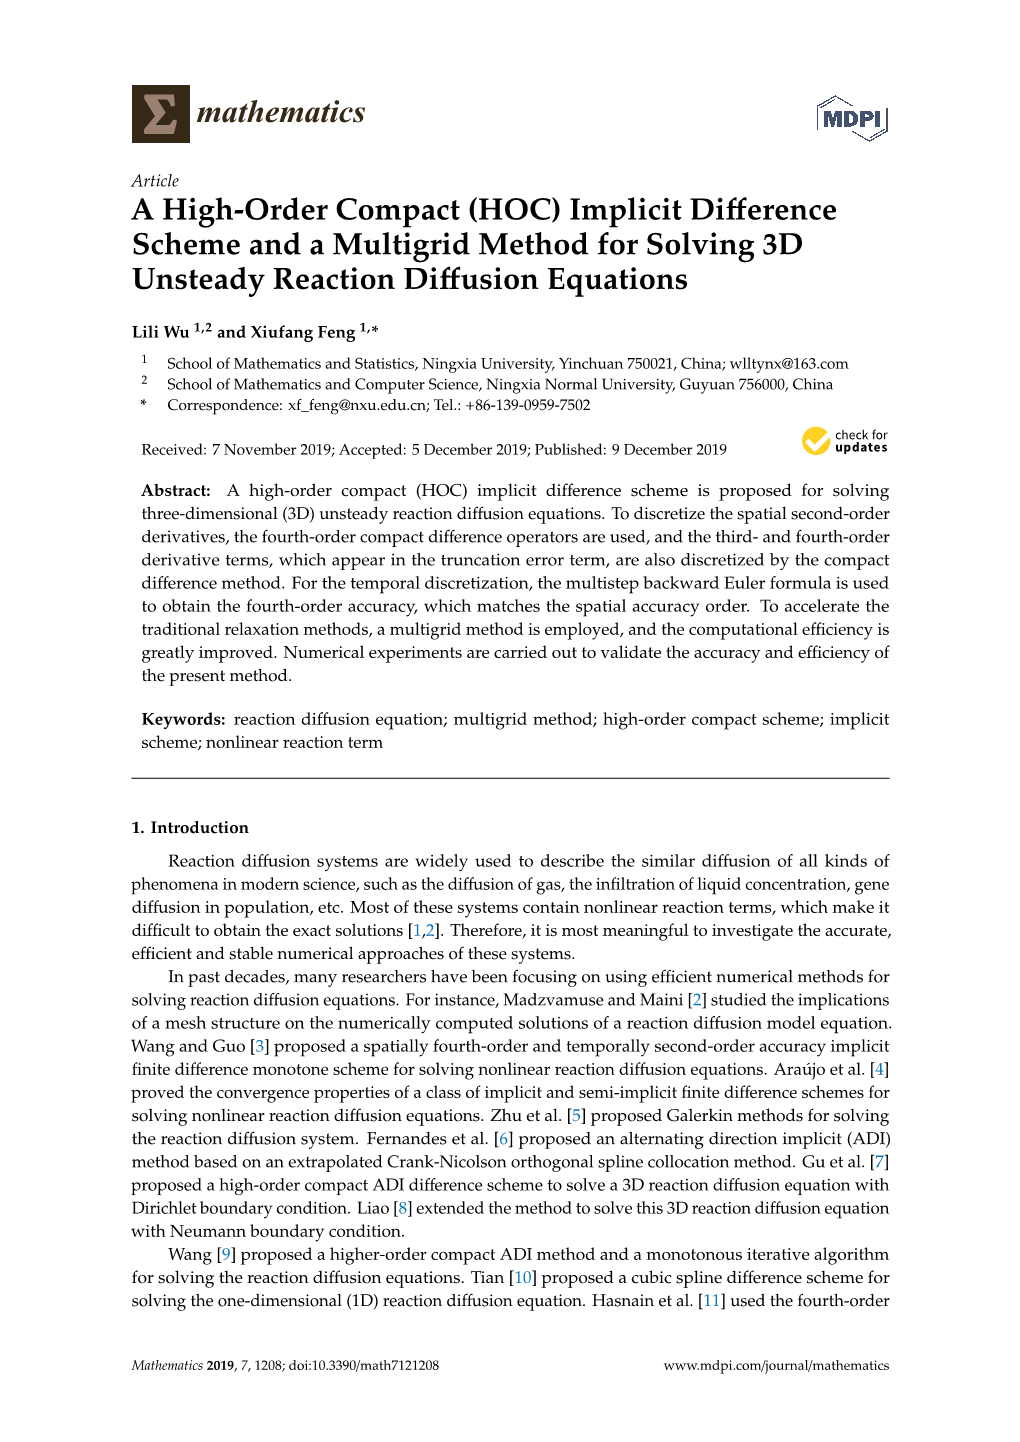 A High-Order Compact (HOC) Implicit Difference Scheme and a Multigrid Method for Solving 3D Unsteady Reaction Diffusion Equations